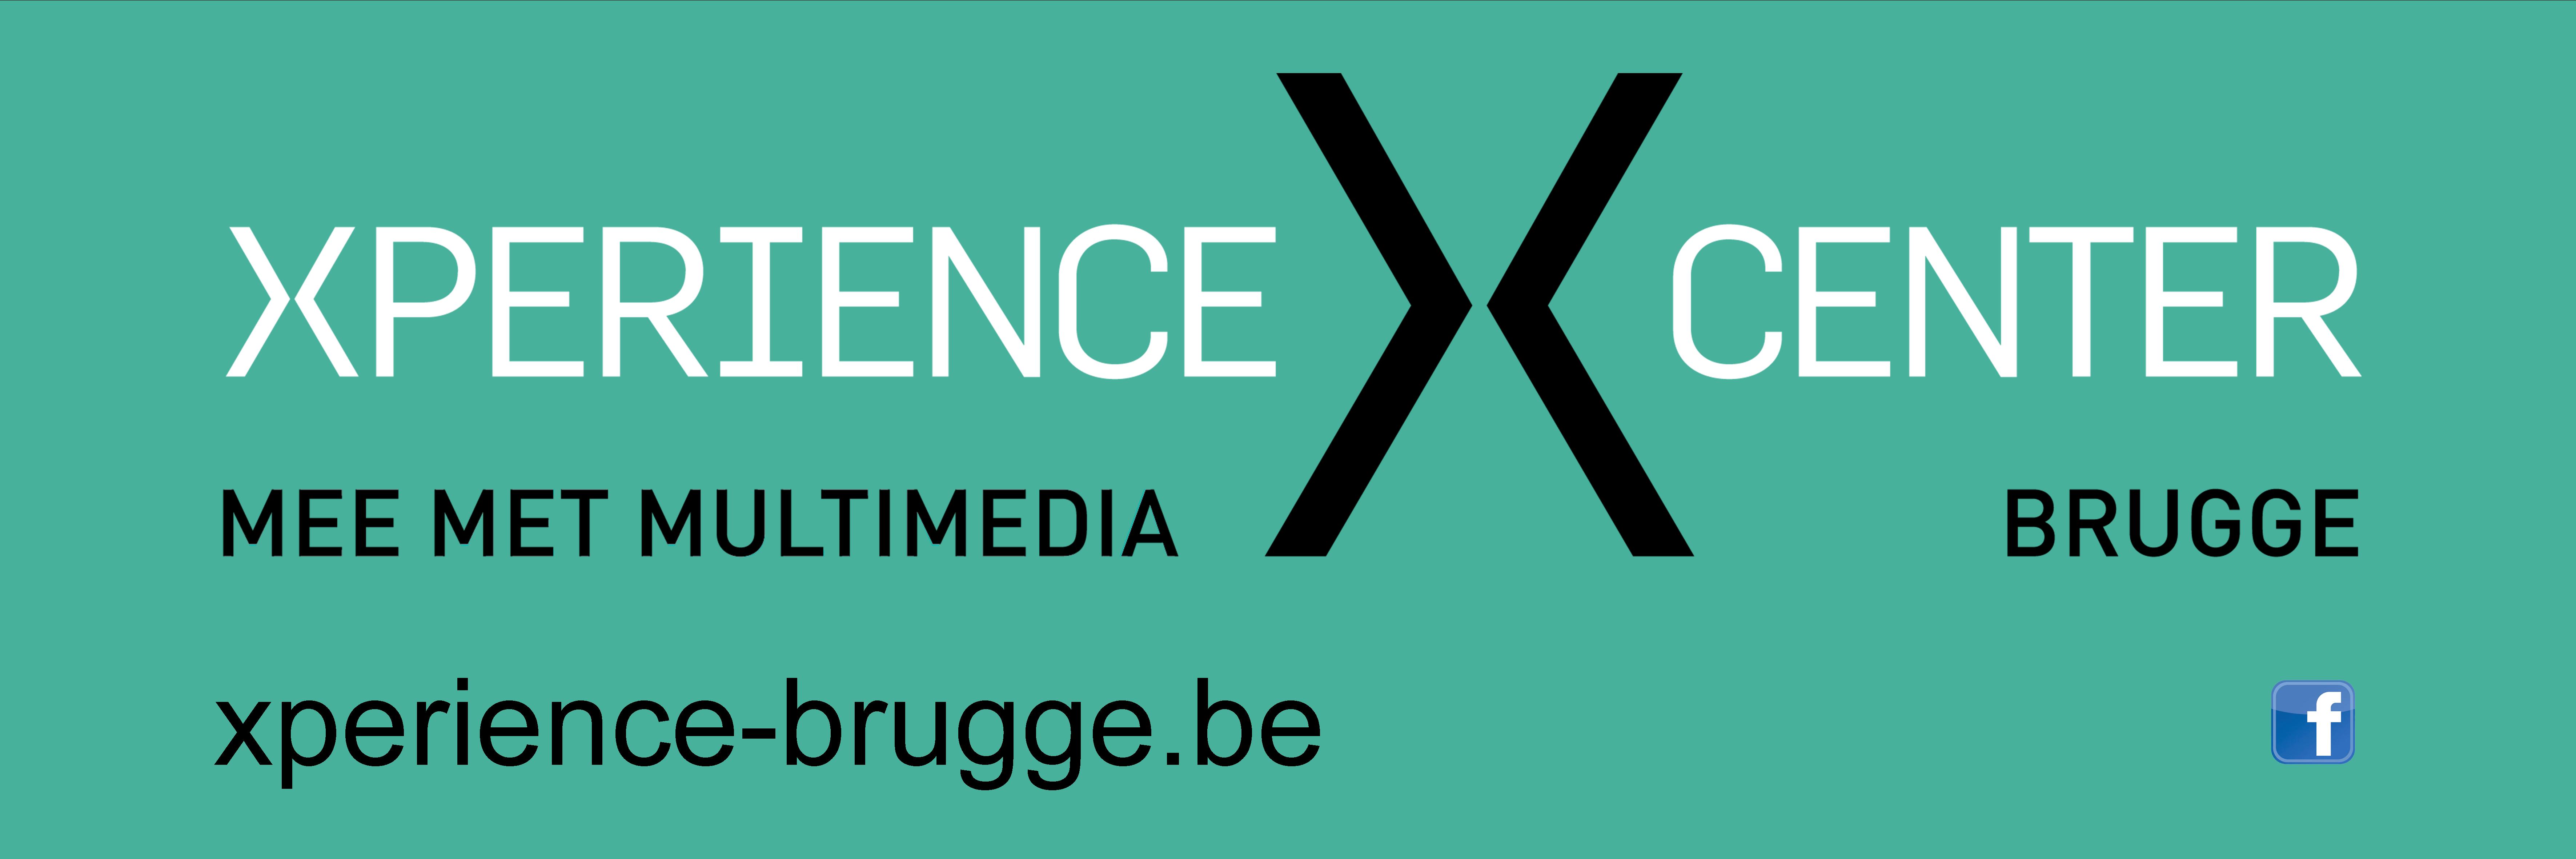 Xperience Center Brugge